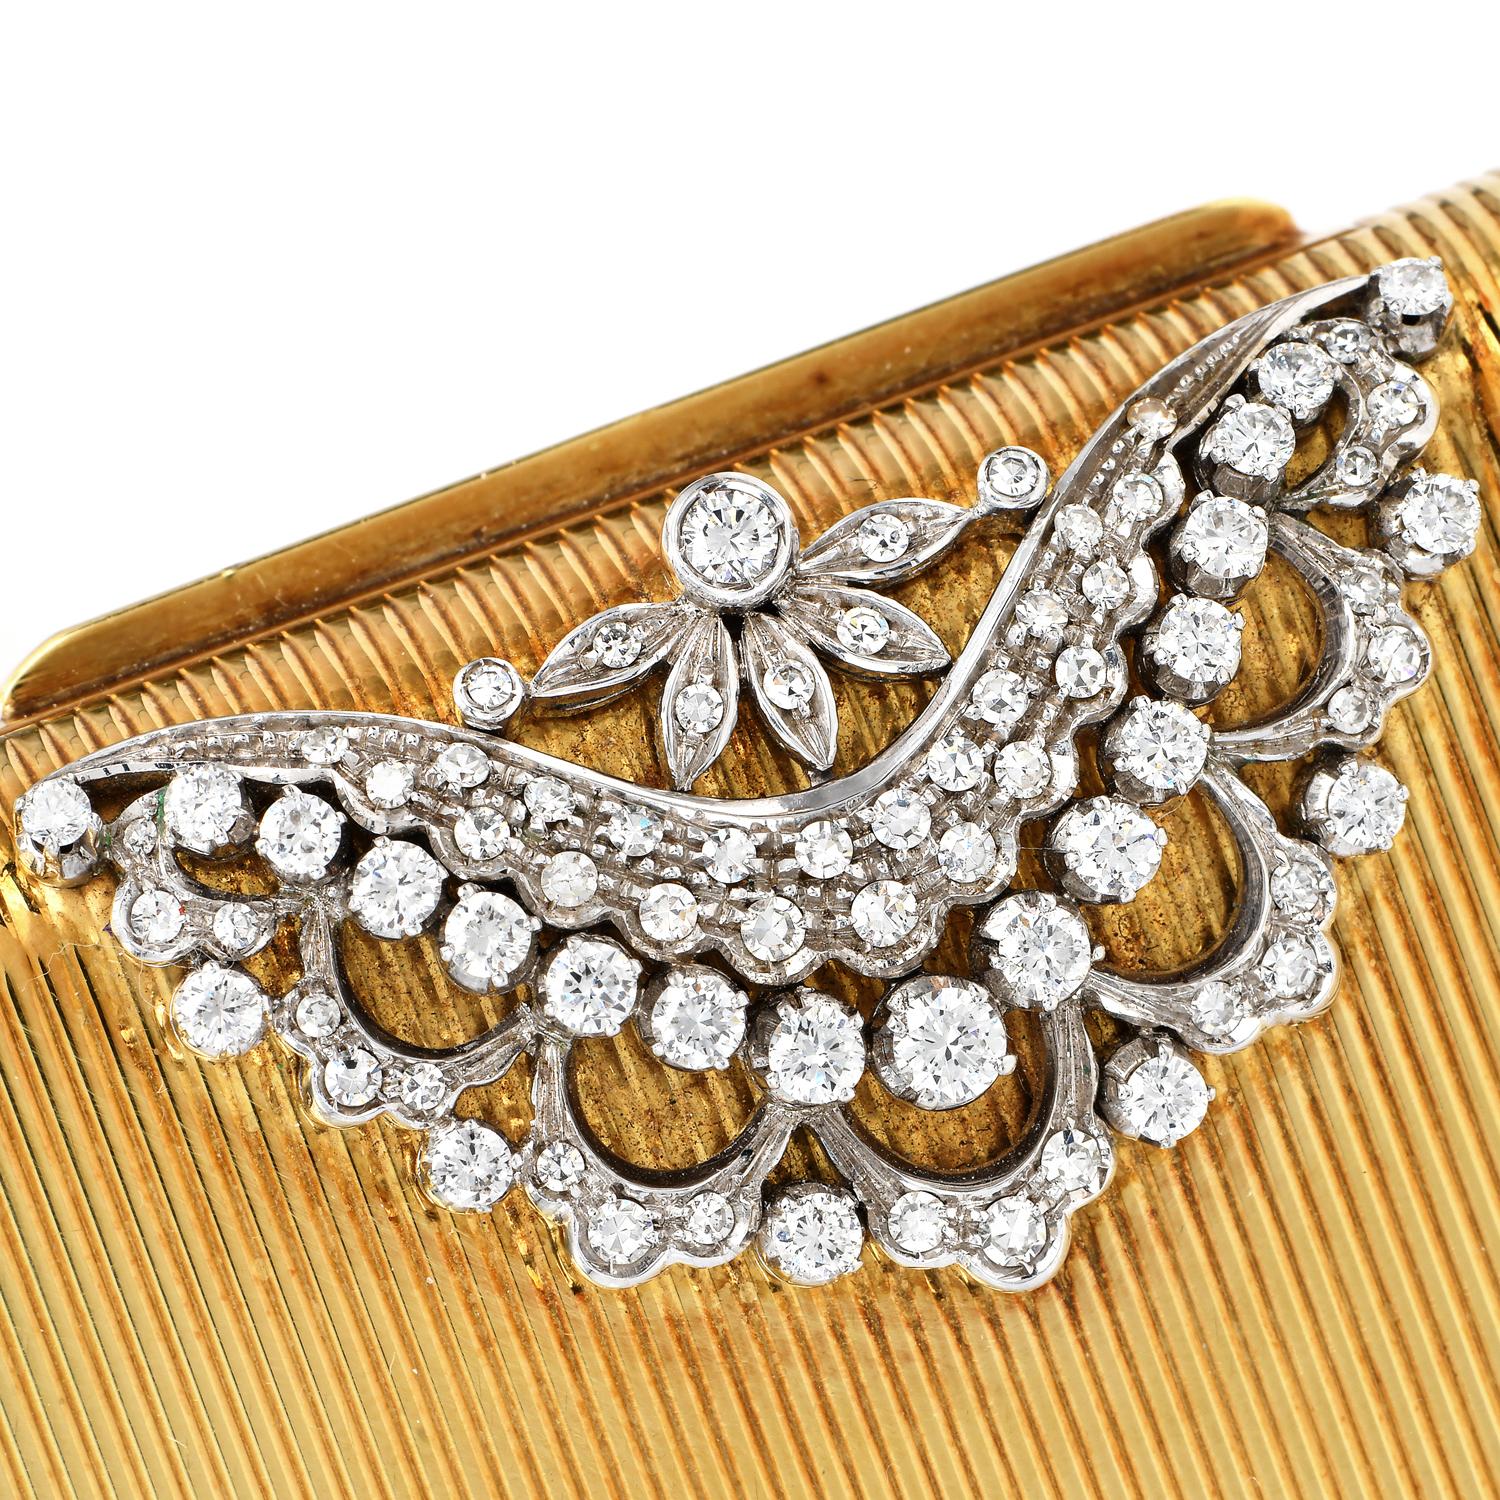 A luxurious way of carrying your make-up!
 This vintage diamond 18K yellow gold compact box from the 1940s, features a diamond-accented closure in 18K white gold with round cut diamonds, in a romantic royal tiara design

The whole piece and its